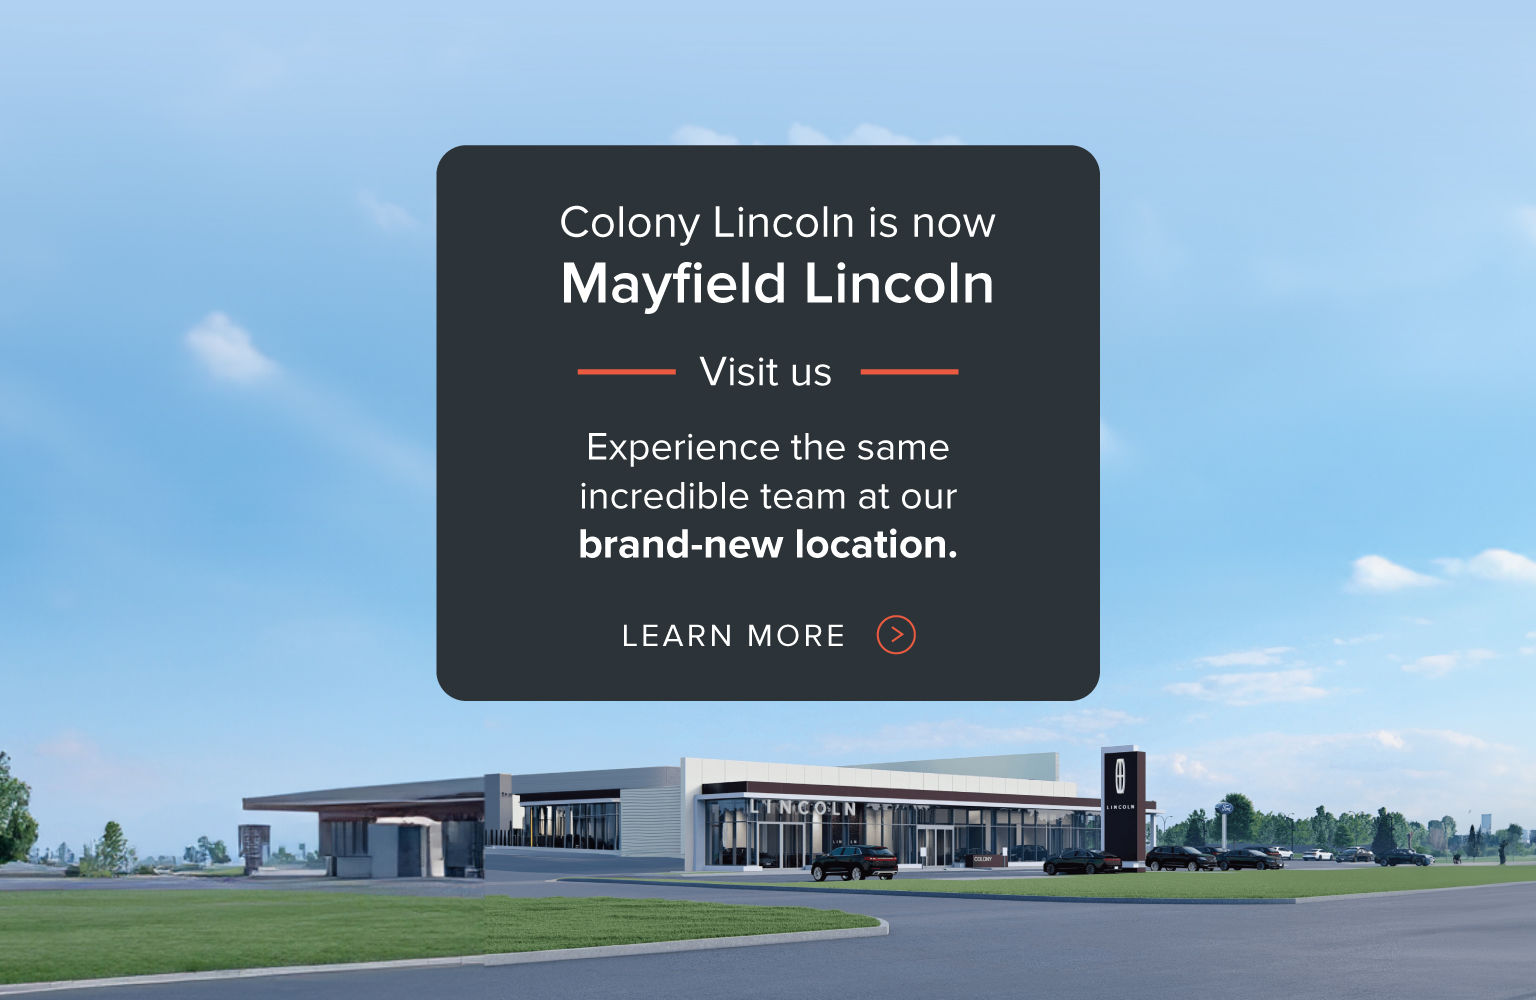 Colony Lincoln rebranded to Mayfield Lincoln